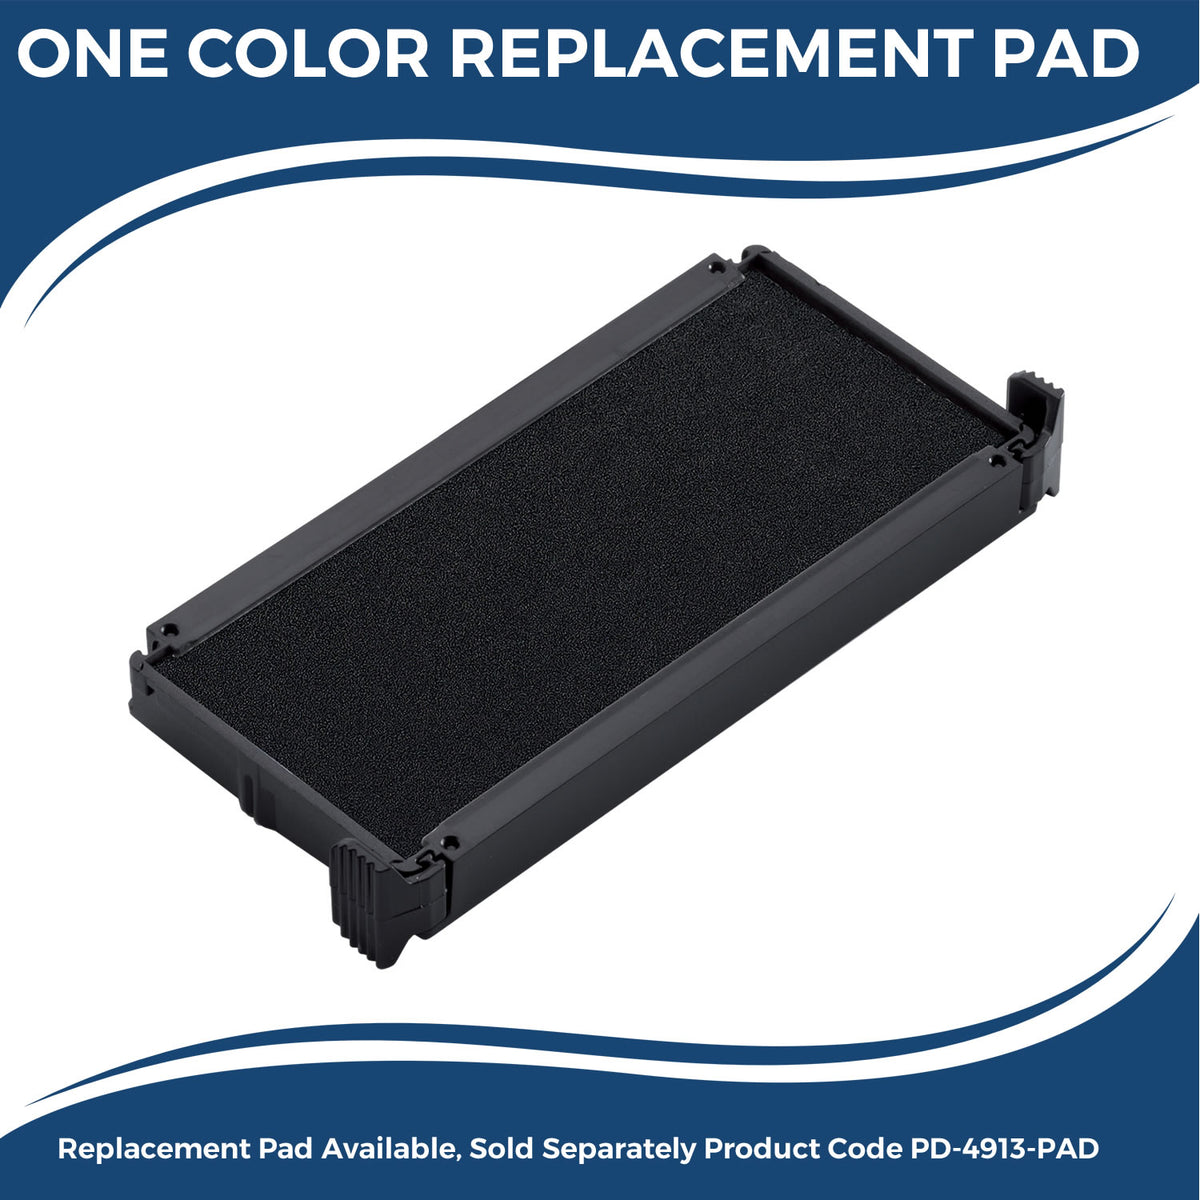 Large Self-Inking Recibido Stamp 5544S Large Replacment Pad